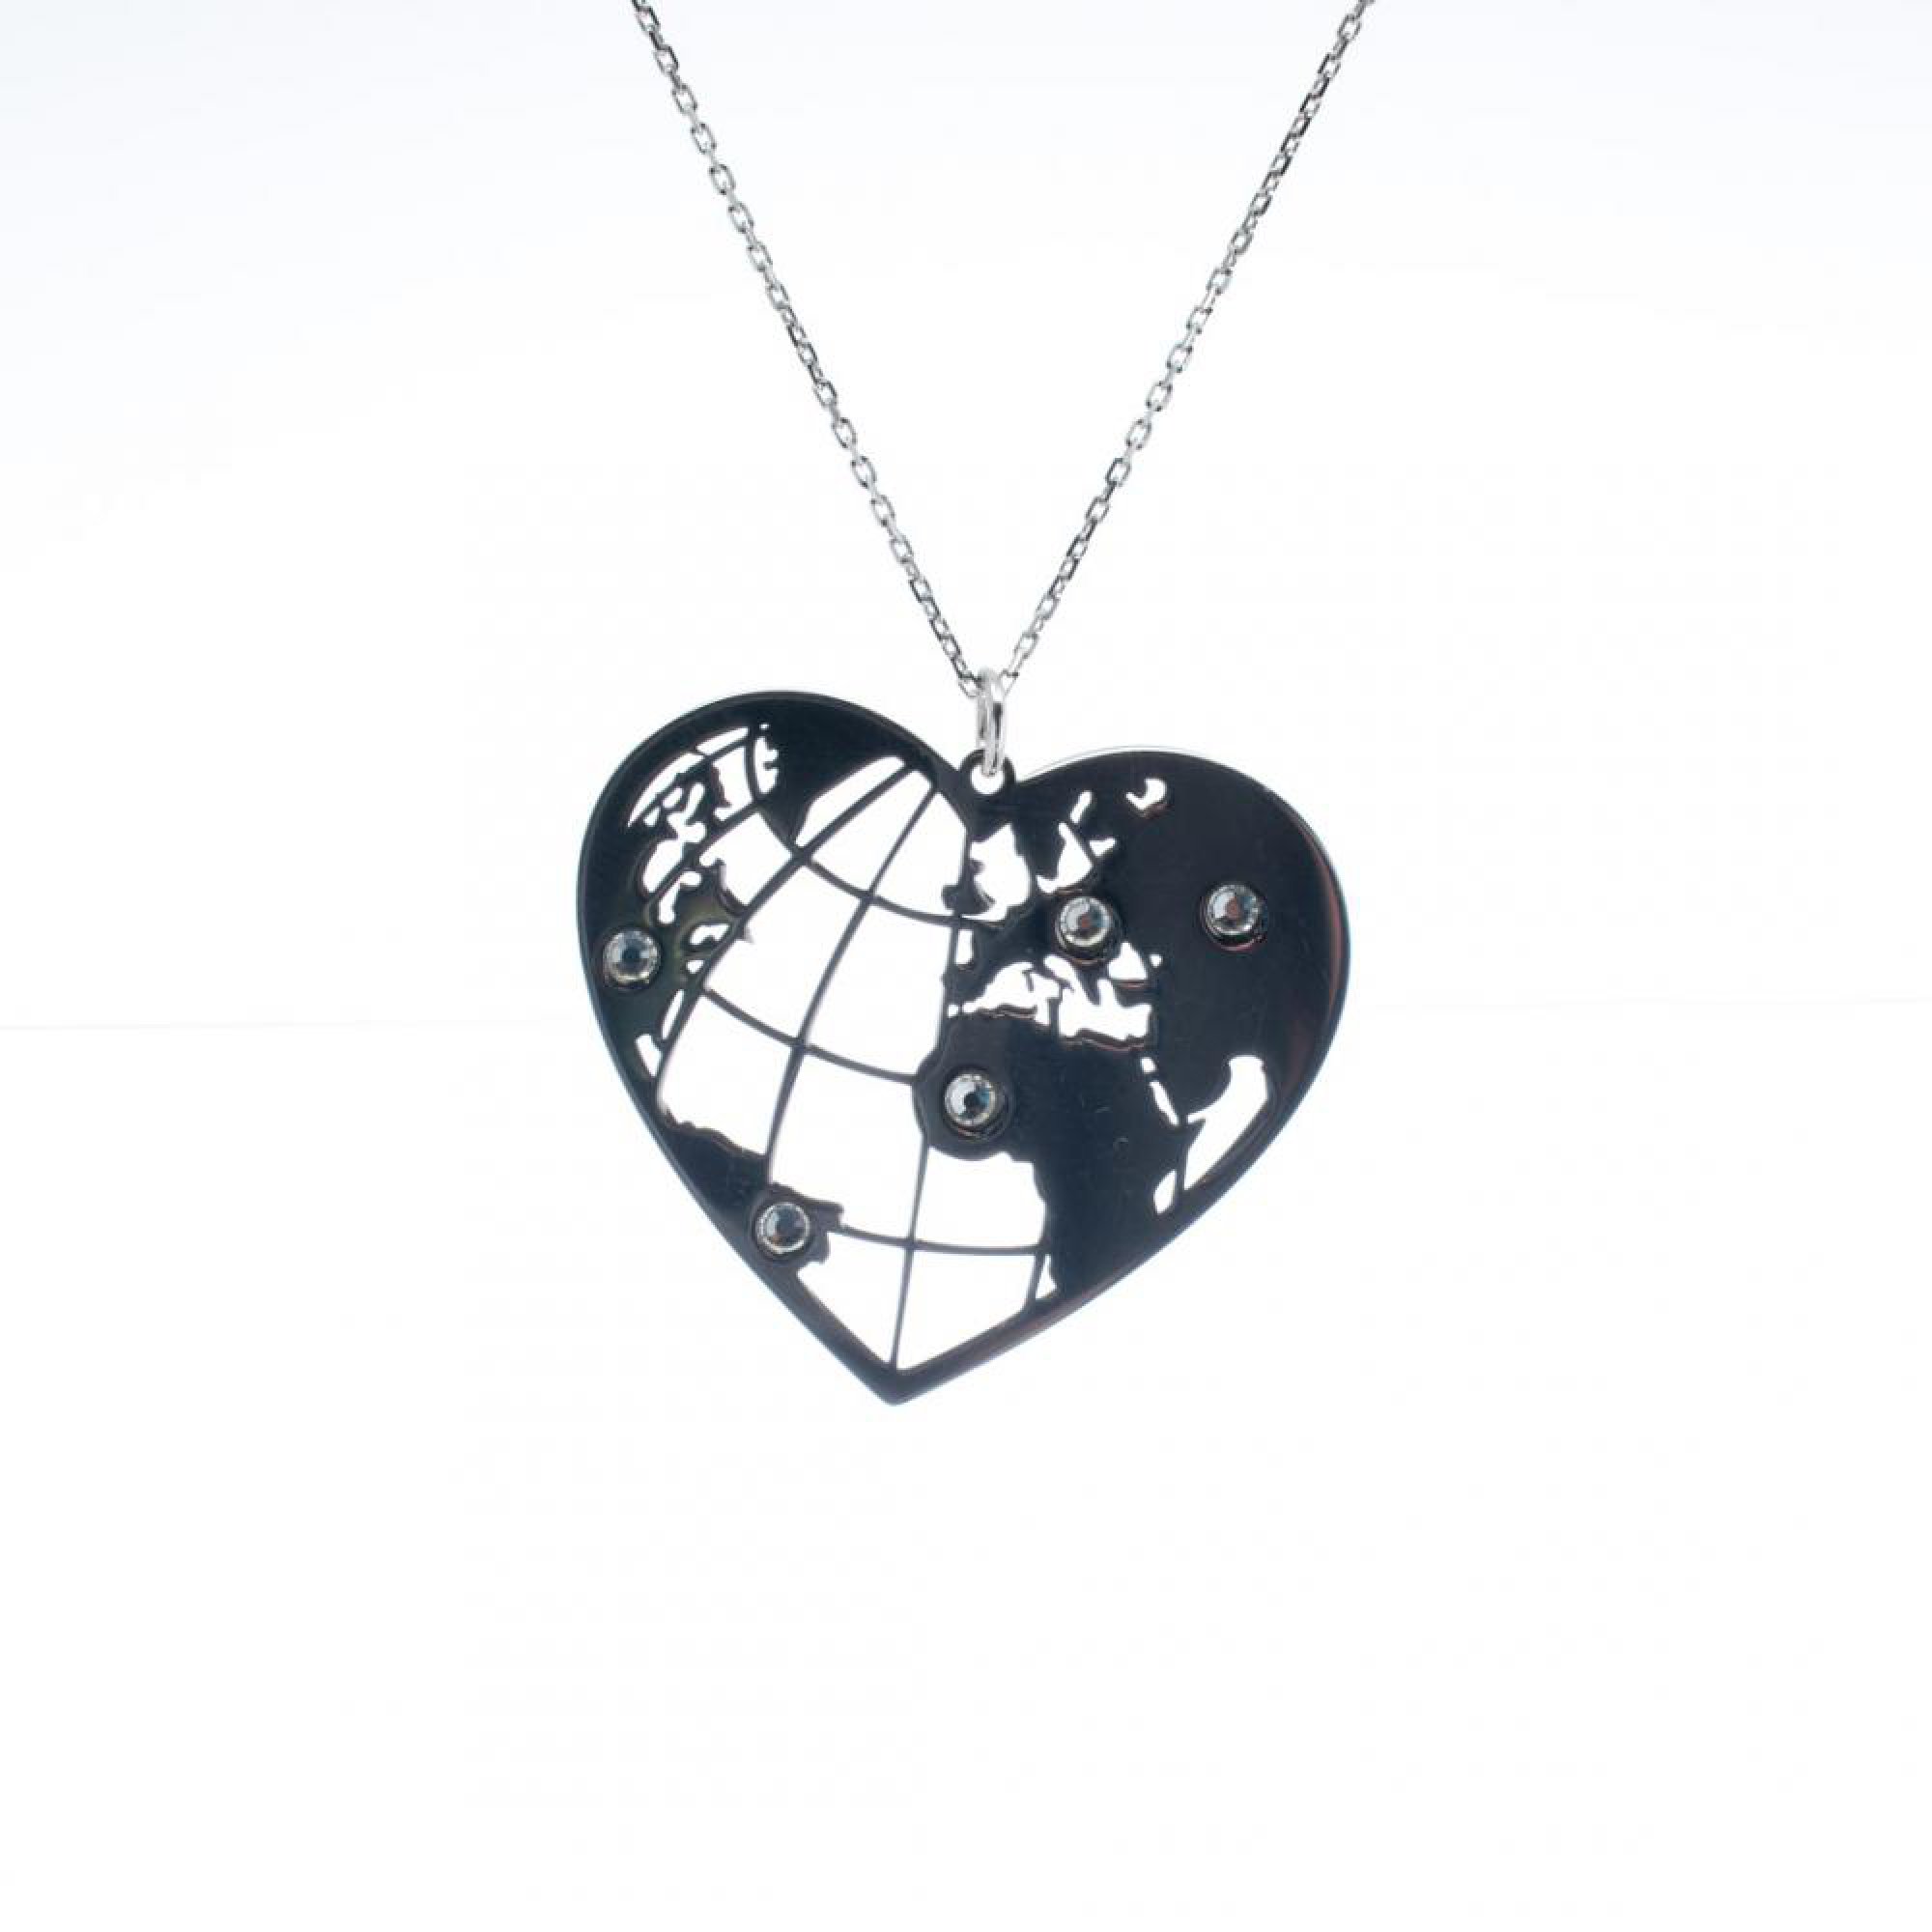 Heart shaped silver globe necklace with zircon stones